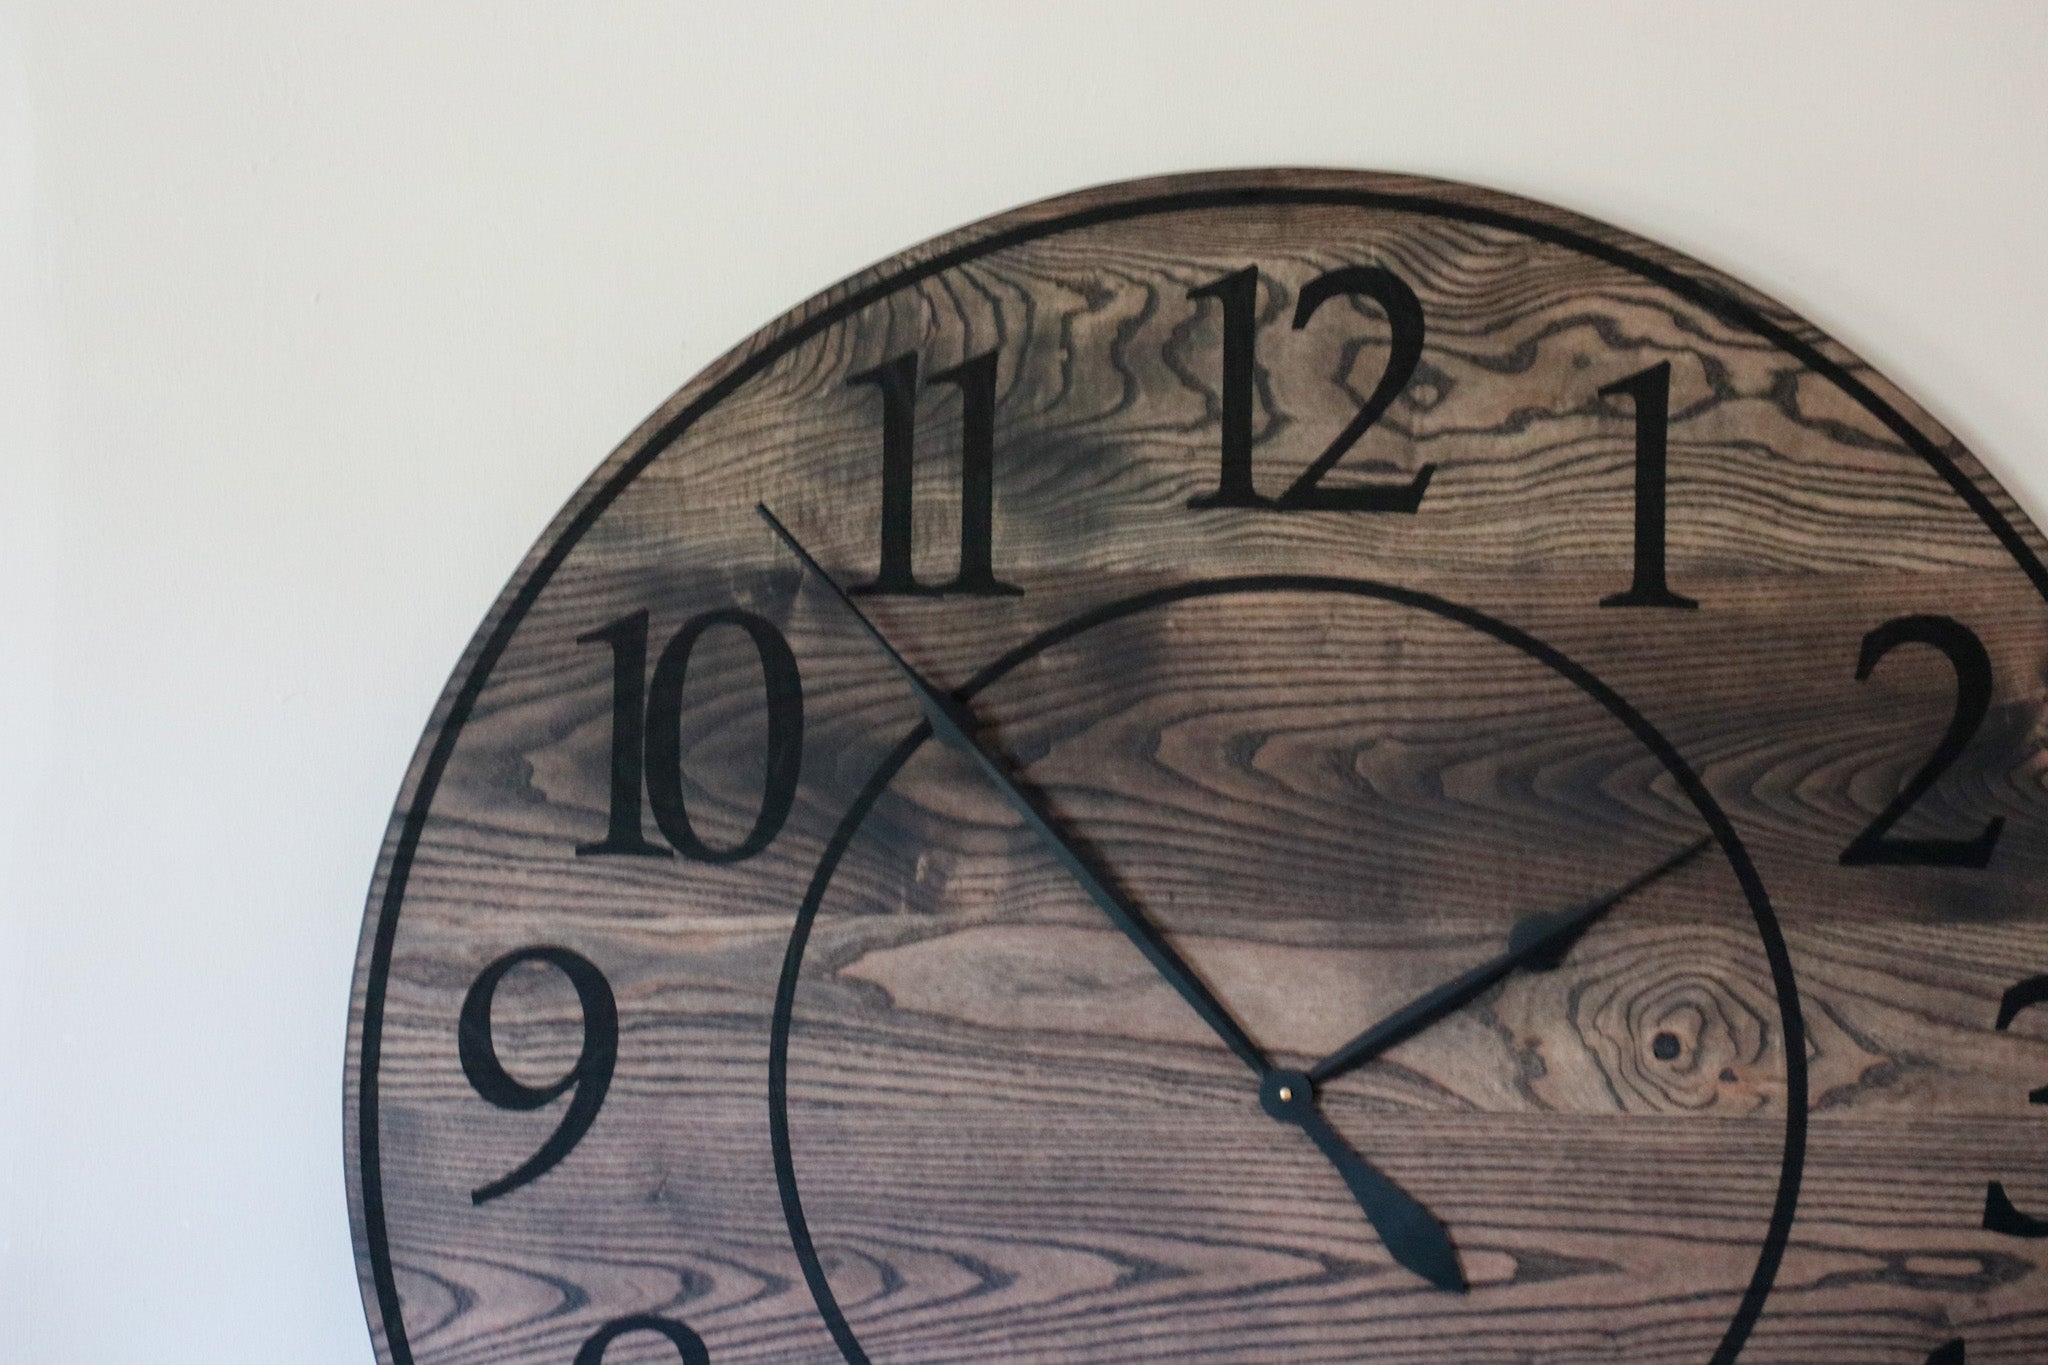 Black Stained Solid Ash Wood Wall Clock with White Roman Numerals - Hazel Oak Farms Handmade Furniture in Iowa, USA